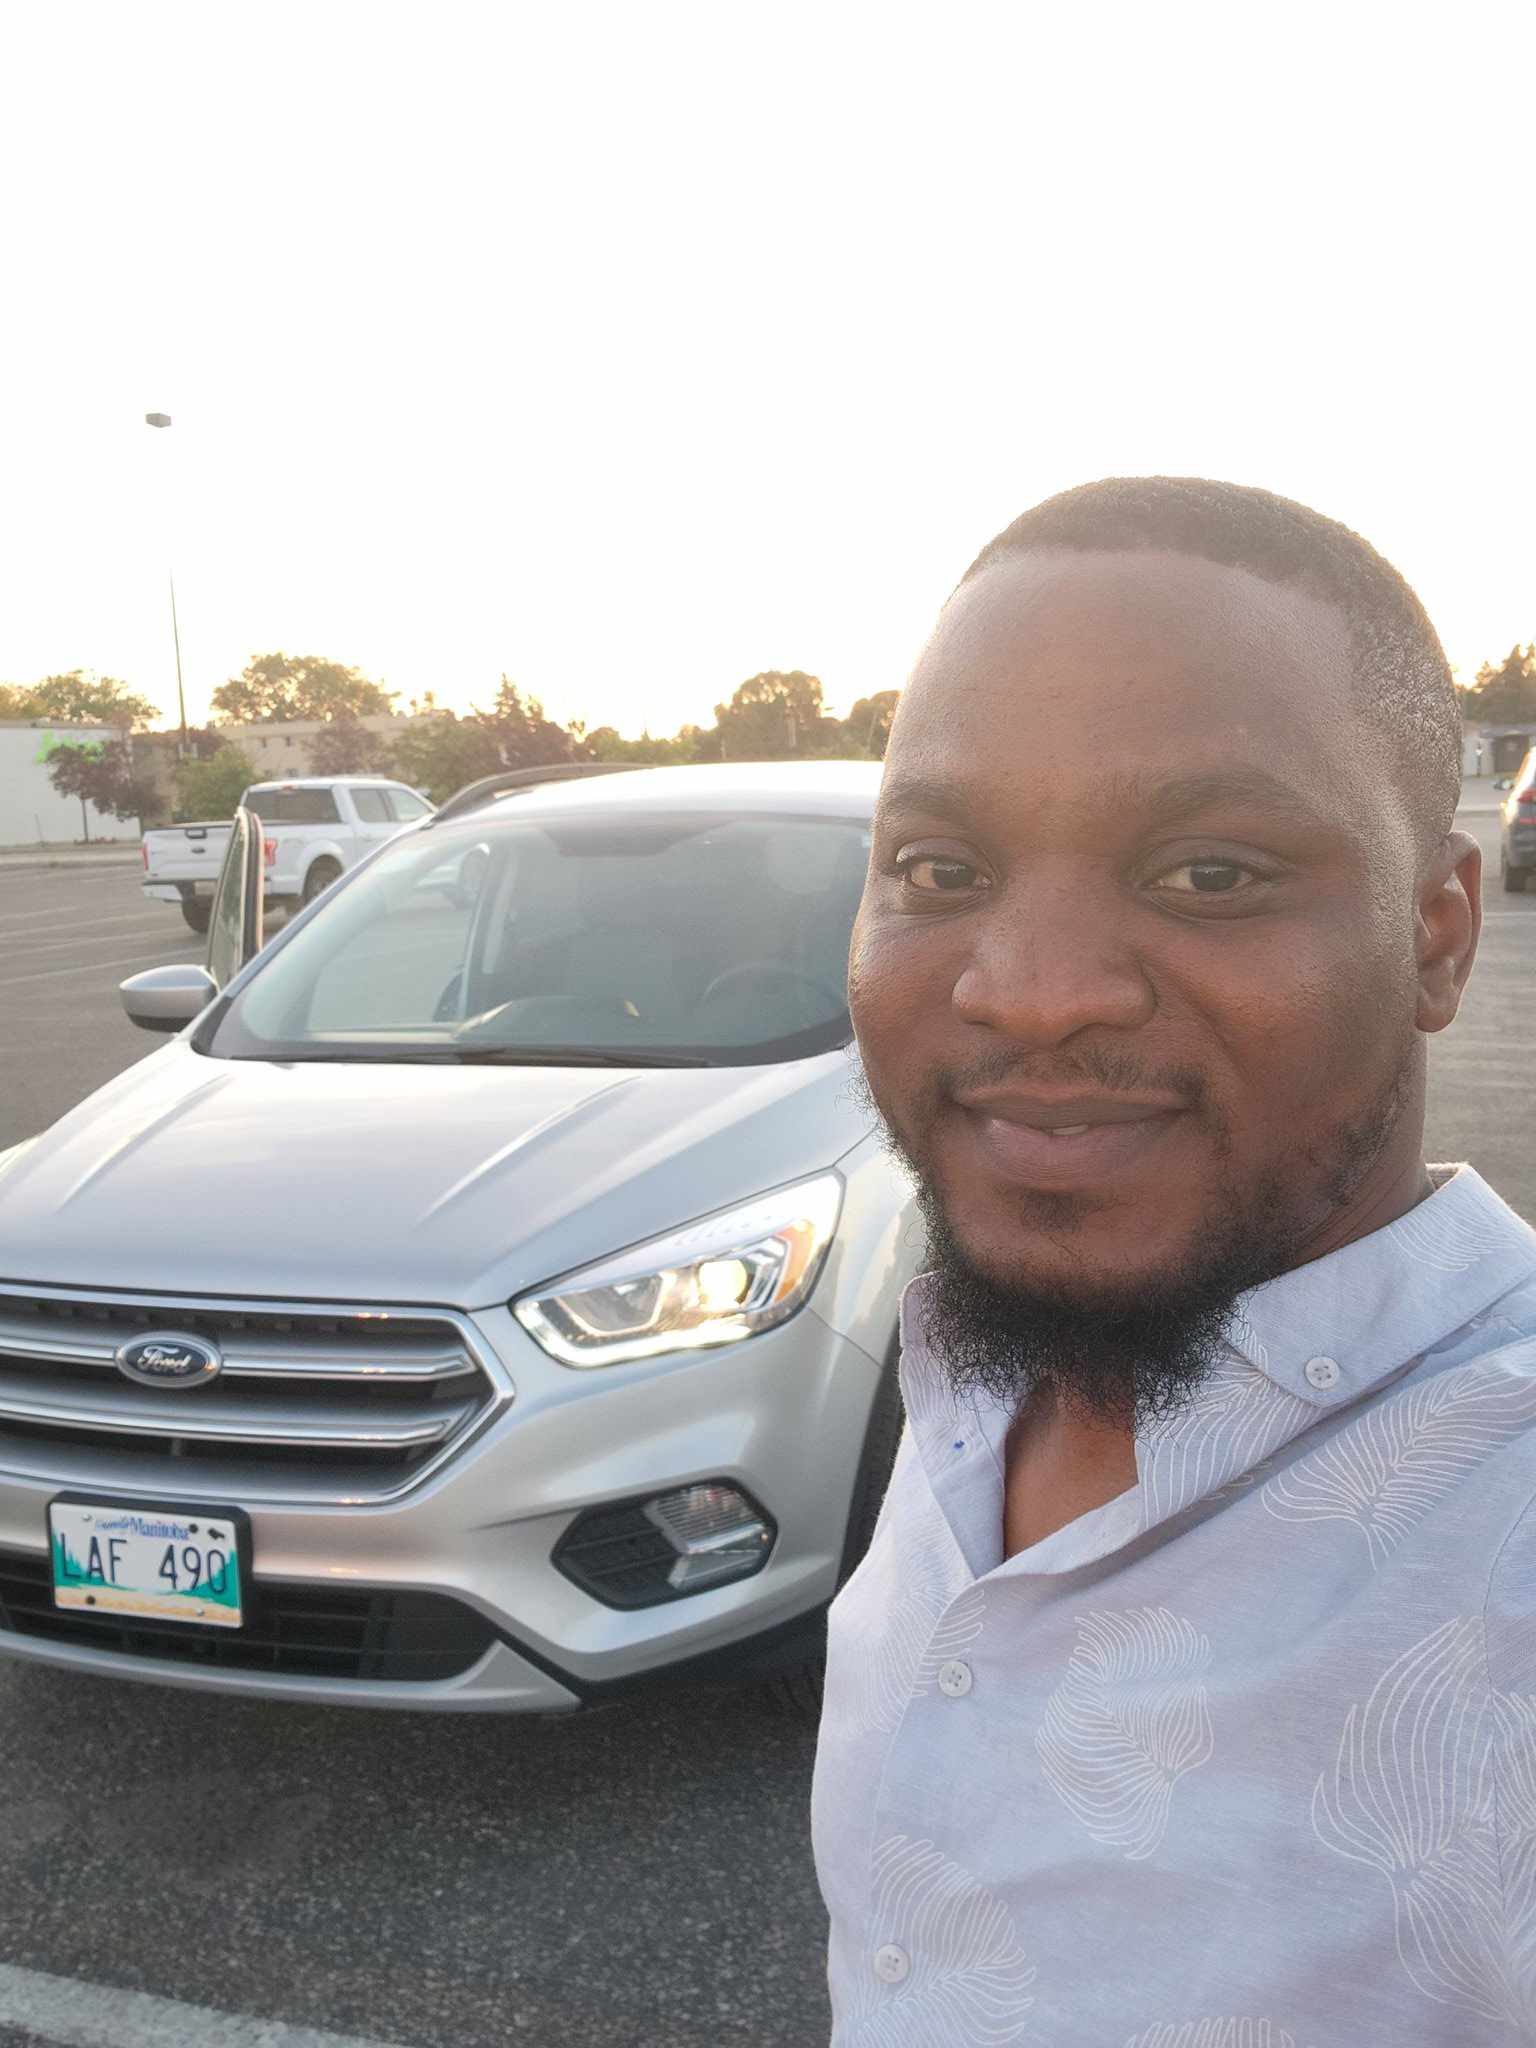 Man shares 'Japa experience' as he gets married, buys new car one year after moving abroad